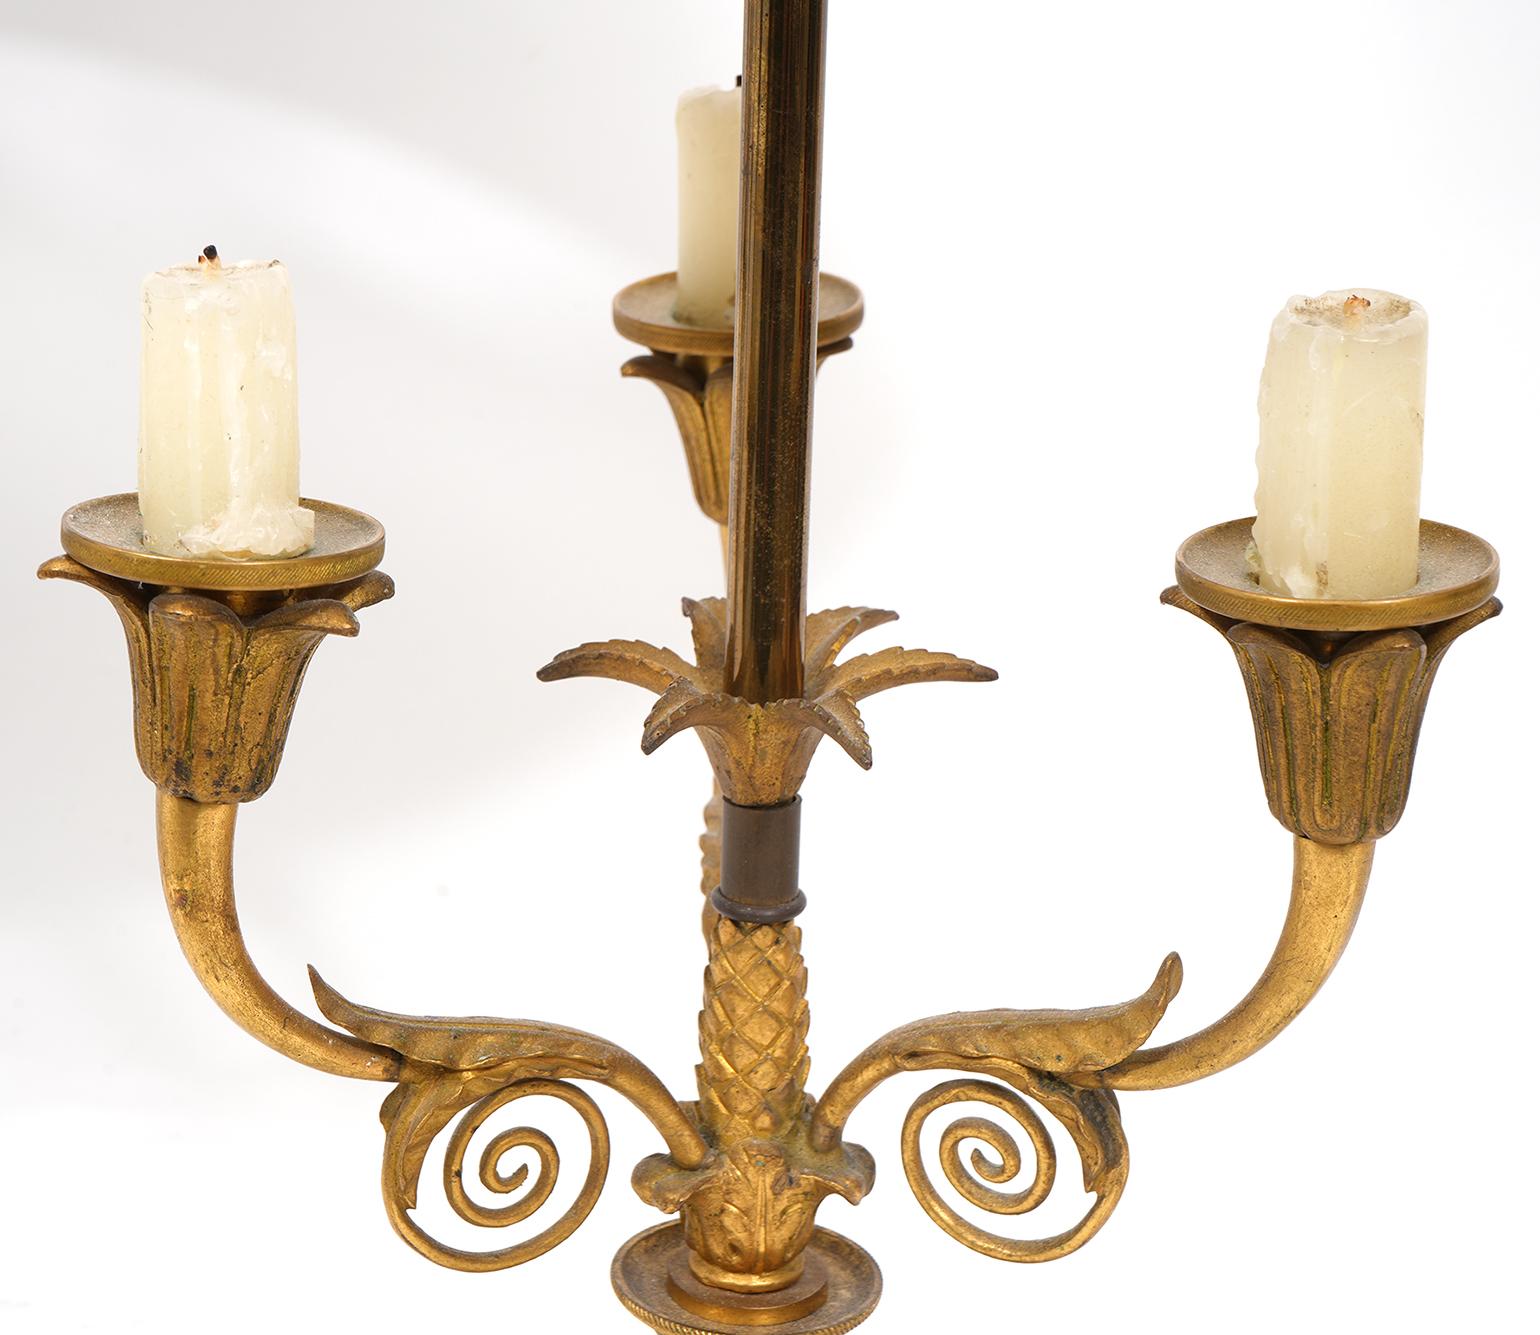 20th Century Pair of Early 20th Ct. French Bronze Lamps with Adjustable Tole Painted Shades